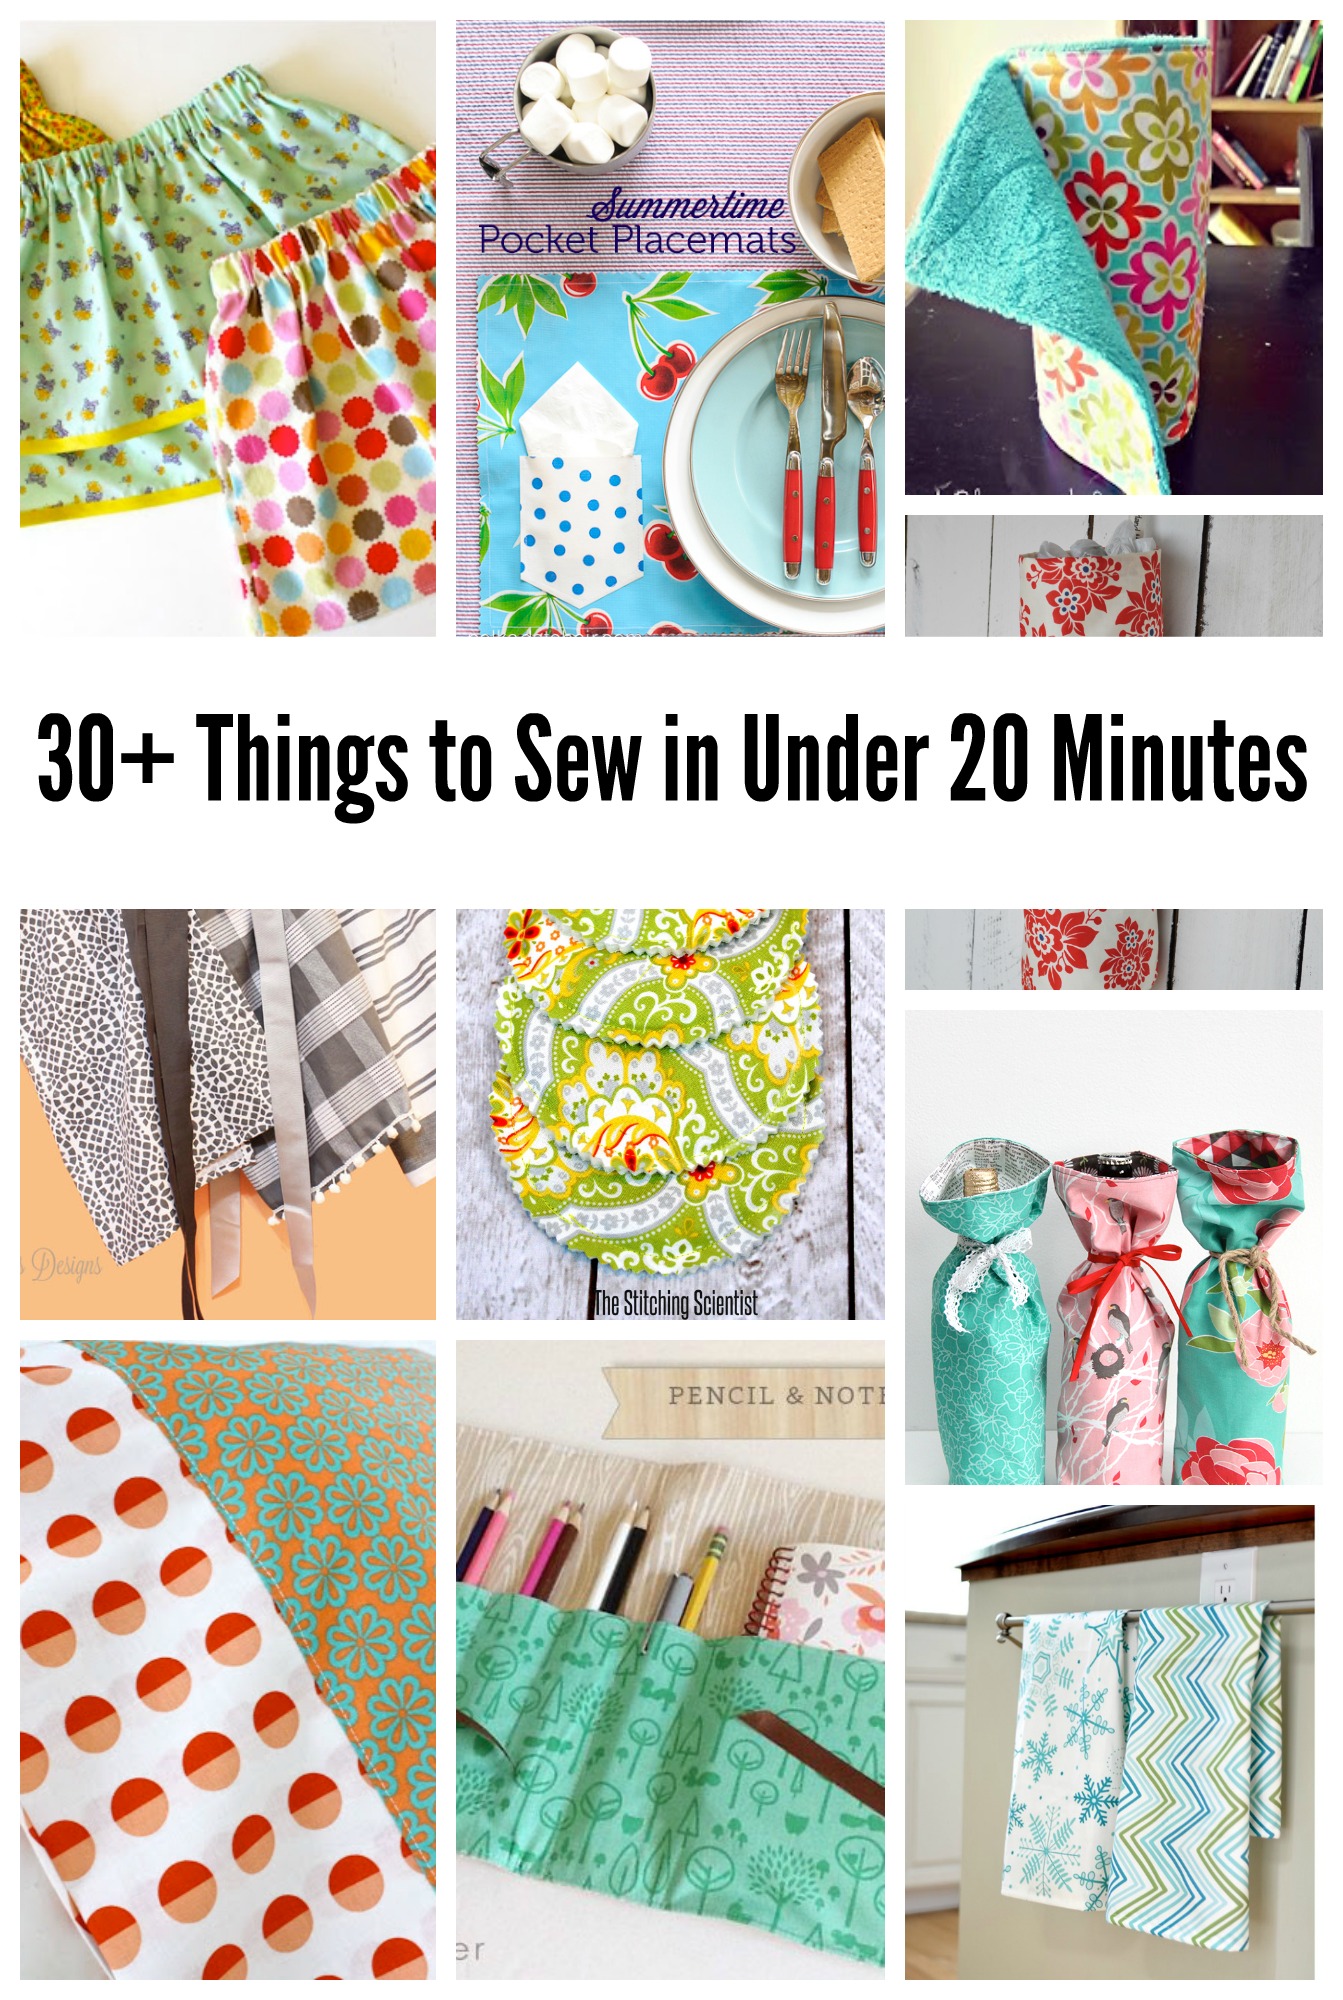 Beginner Sewing Projects-30+ Things to Sew in Under 20 Minutes